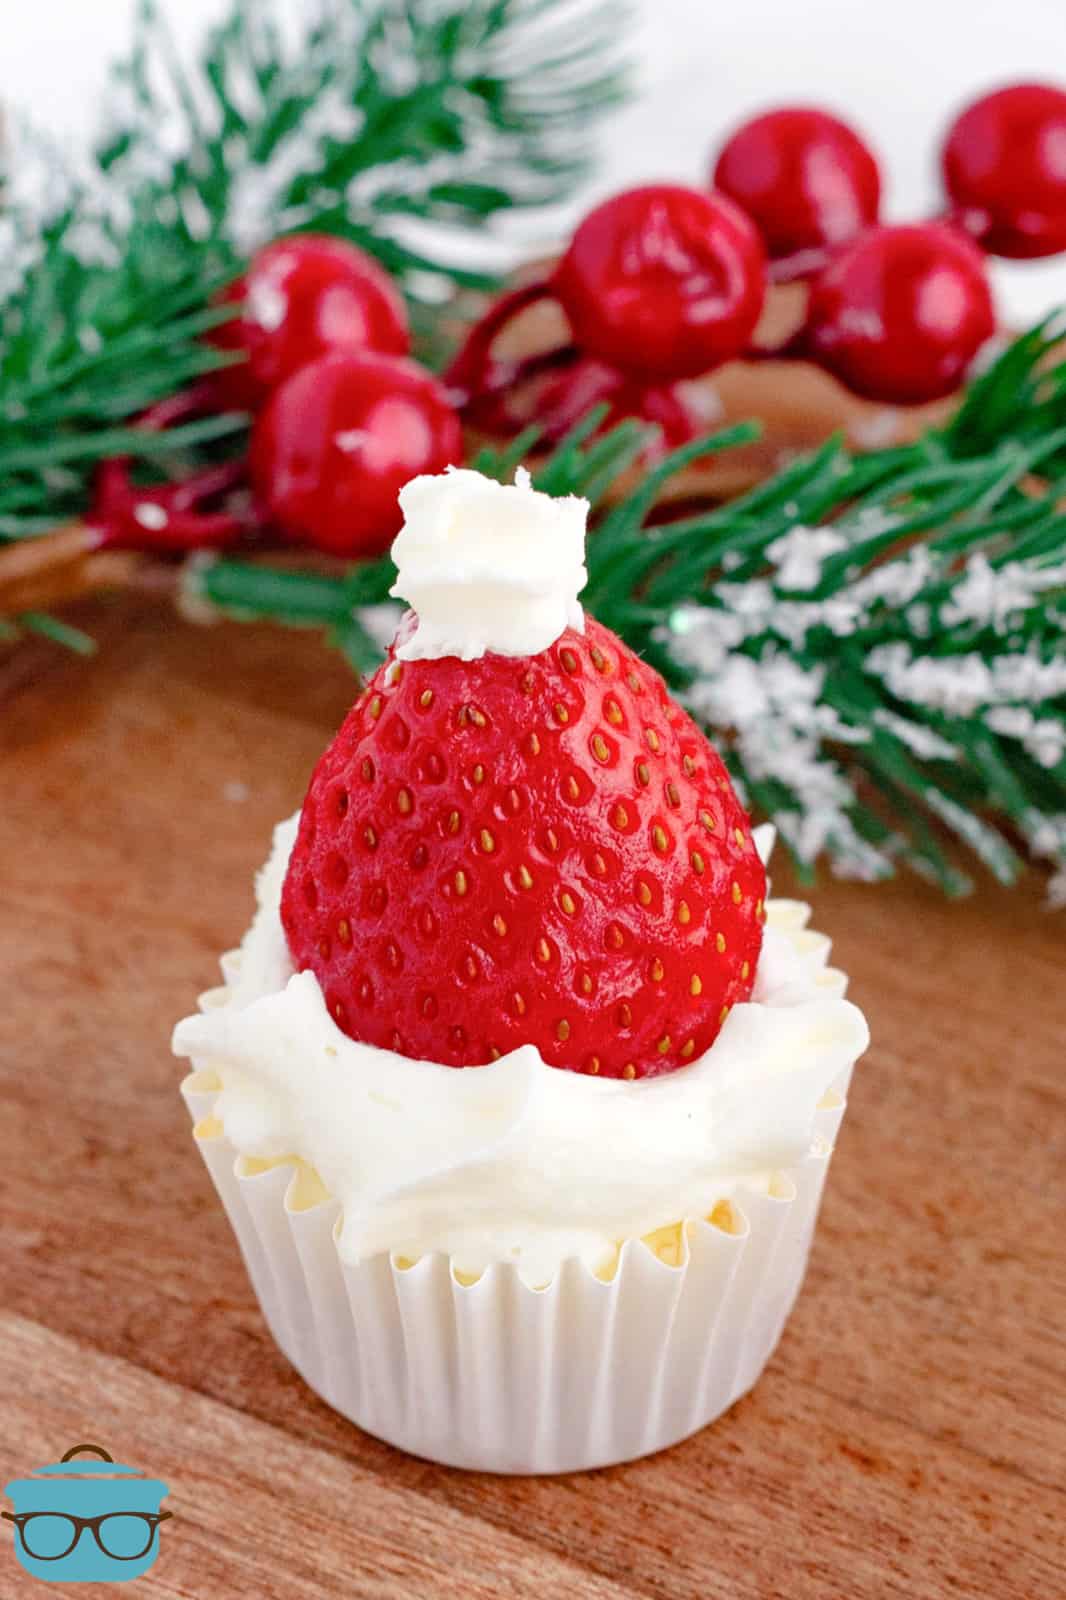 One of the Santa Hat Mini Cheesecakes on wooden board with decorations in background.